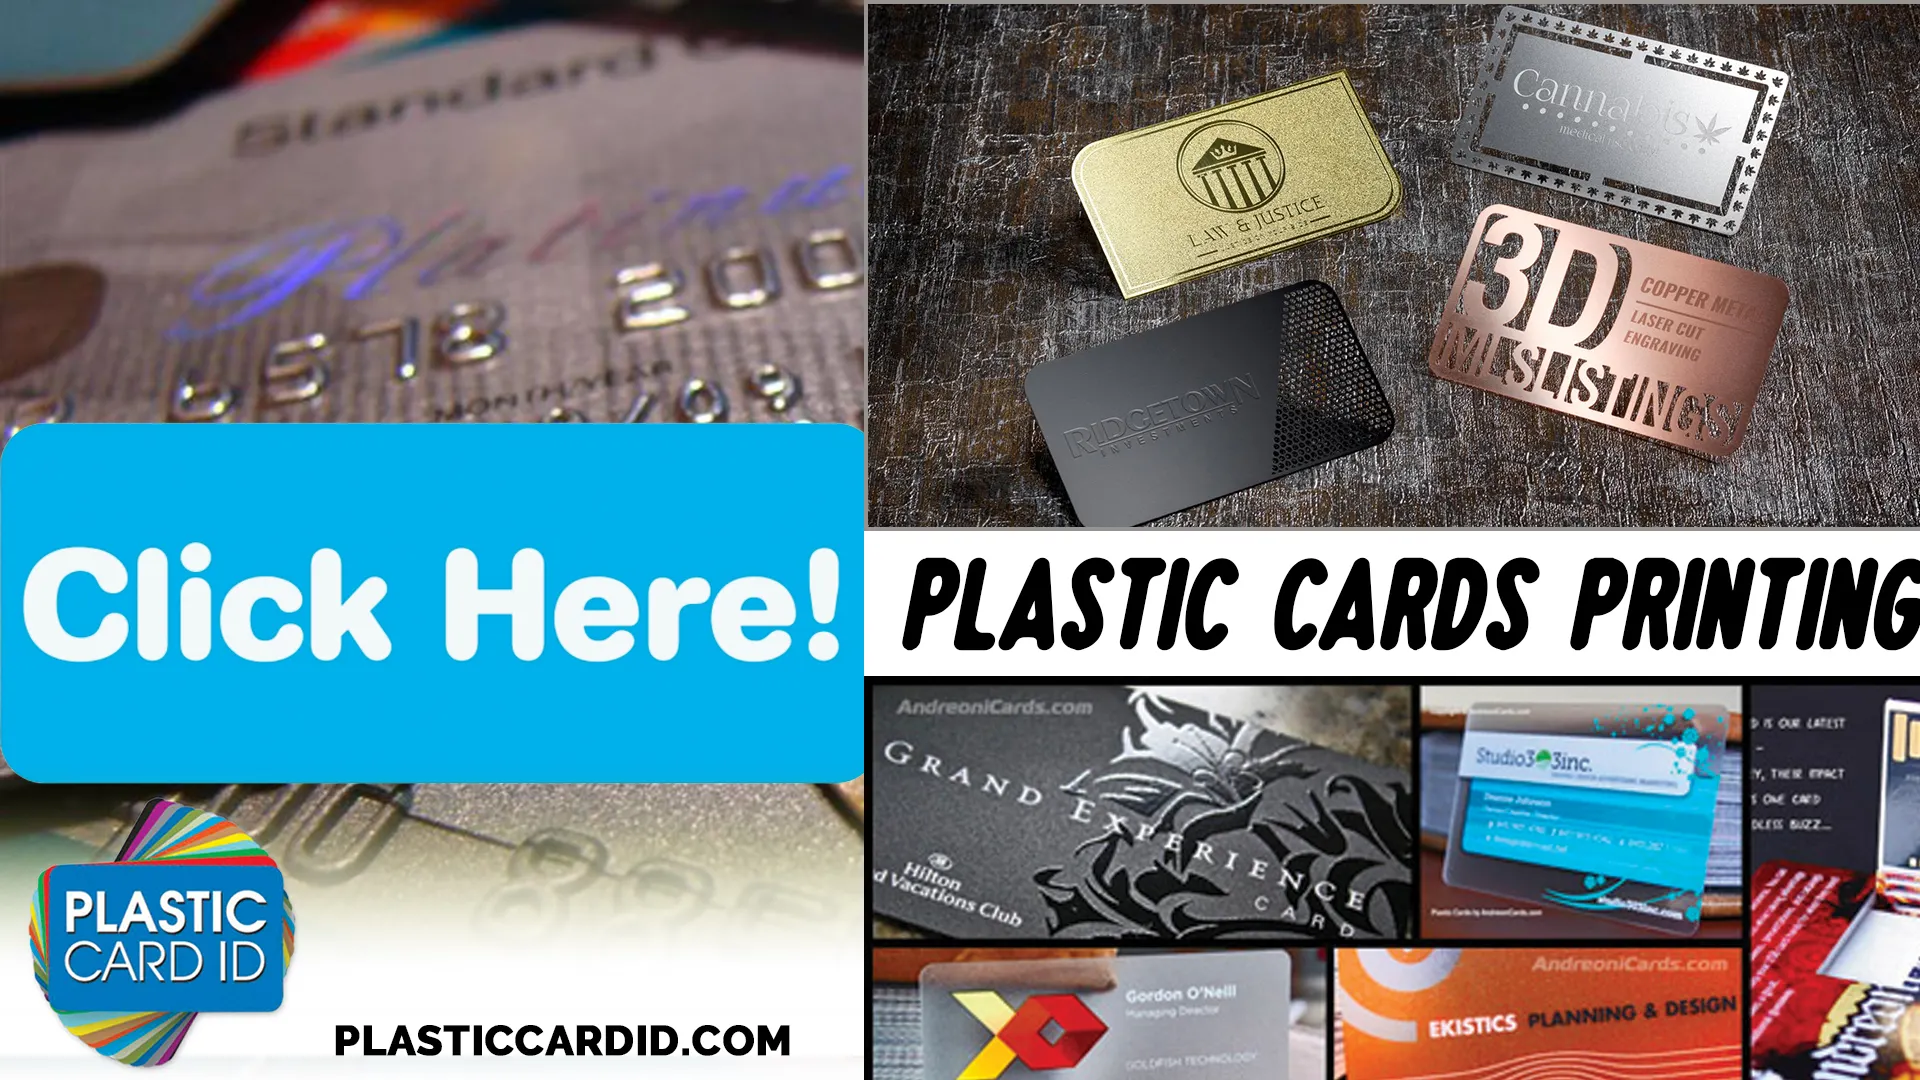 Exploring Your Options with Plastic Card ID
